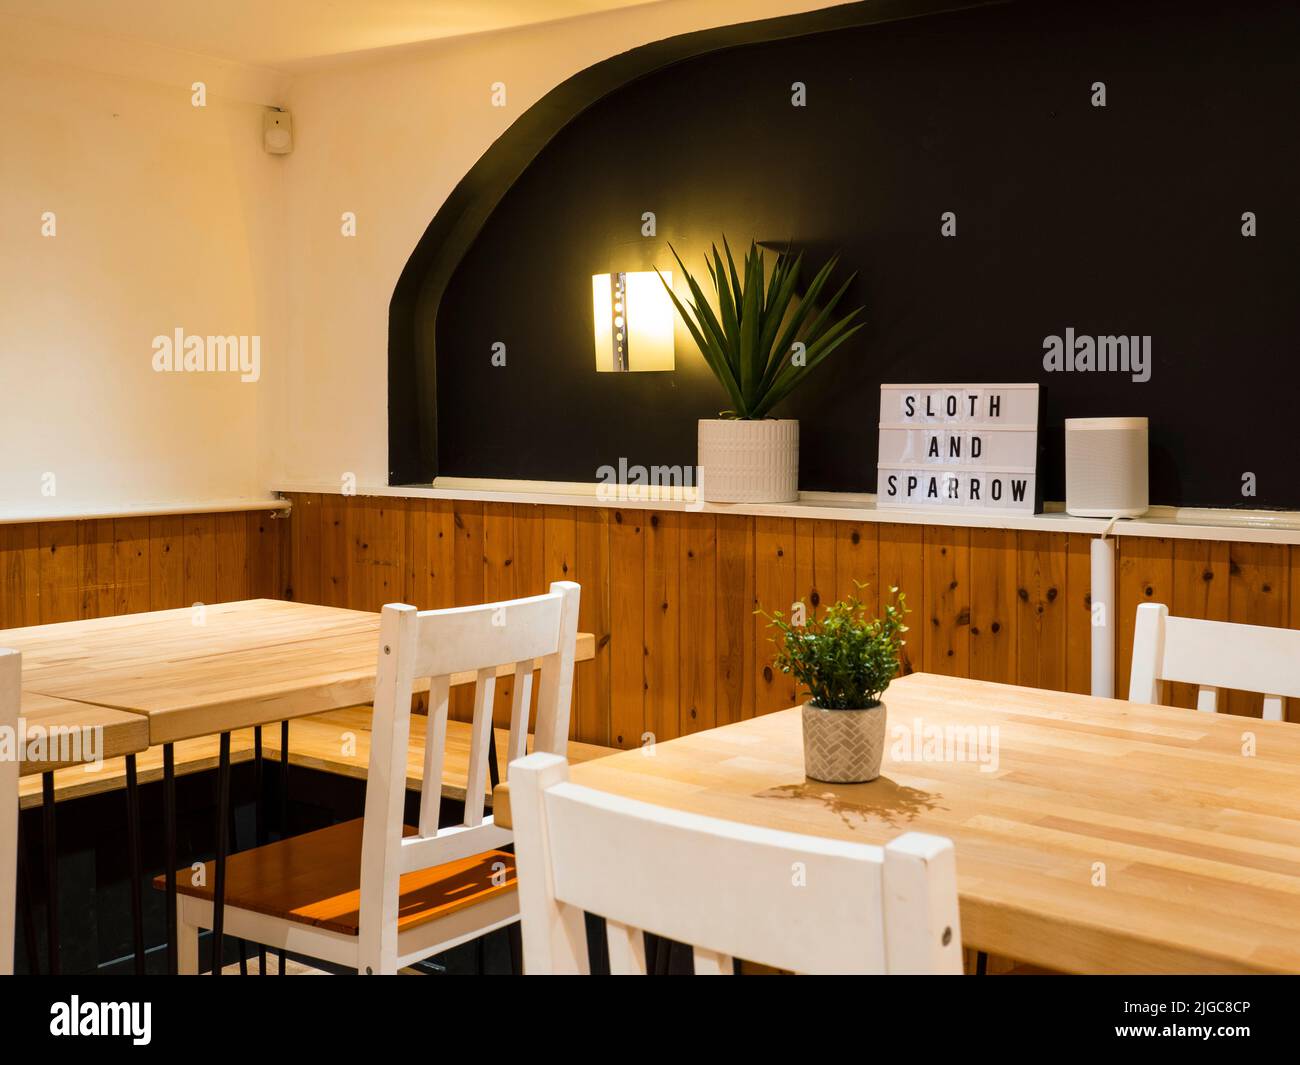 Sloth and Sparrow, Plant Based Restaurant, Falmouth, Cornwall, England, UK, GB. Stock Photo